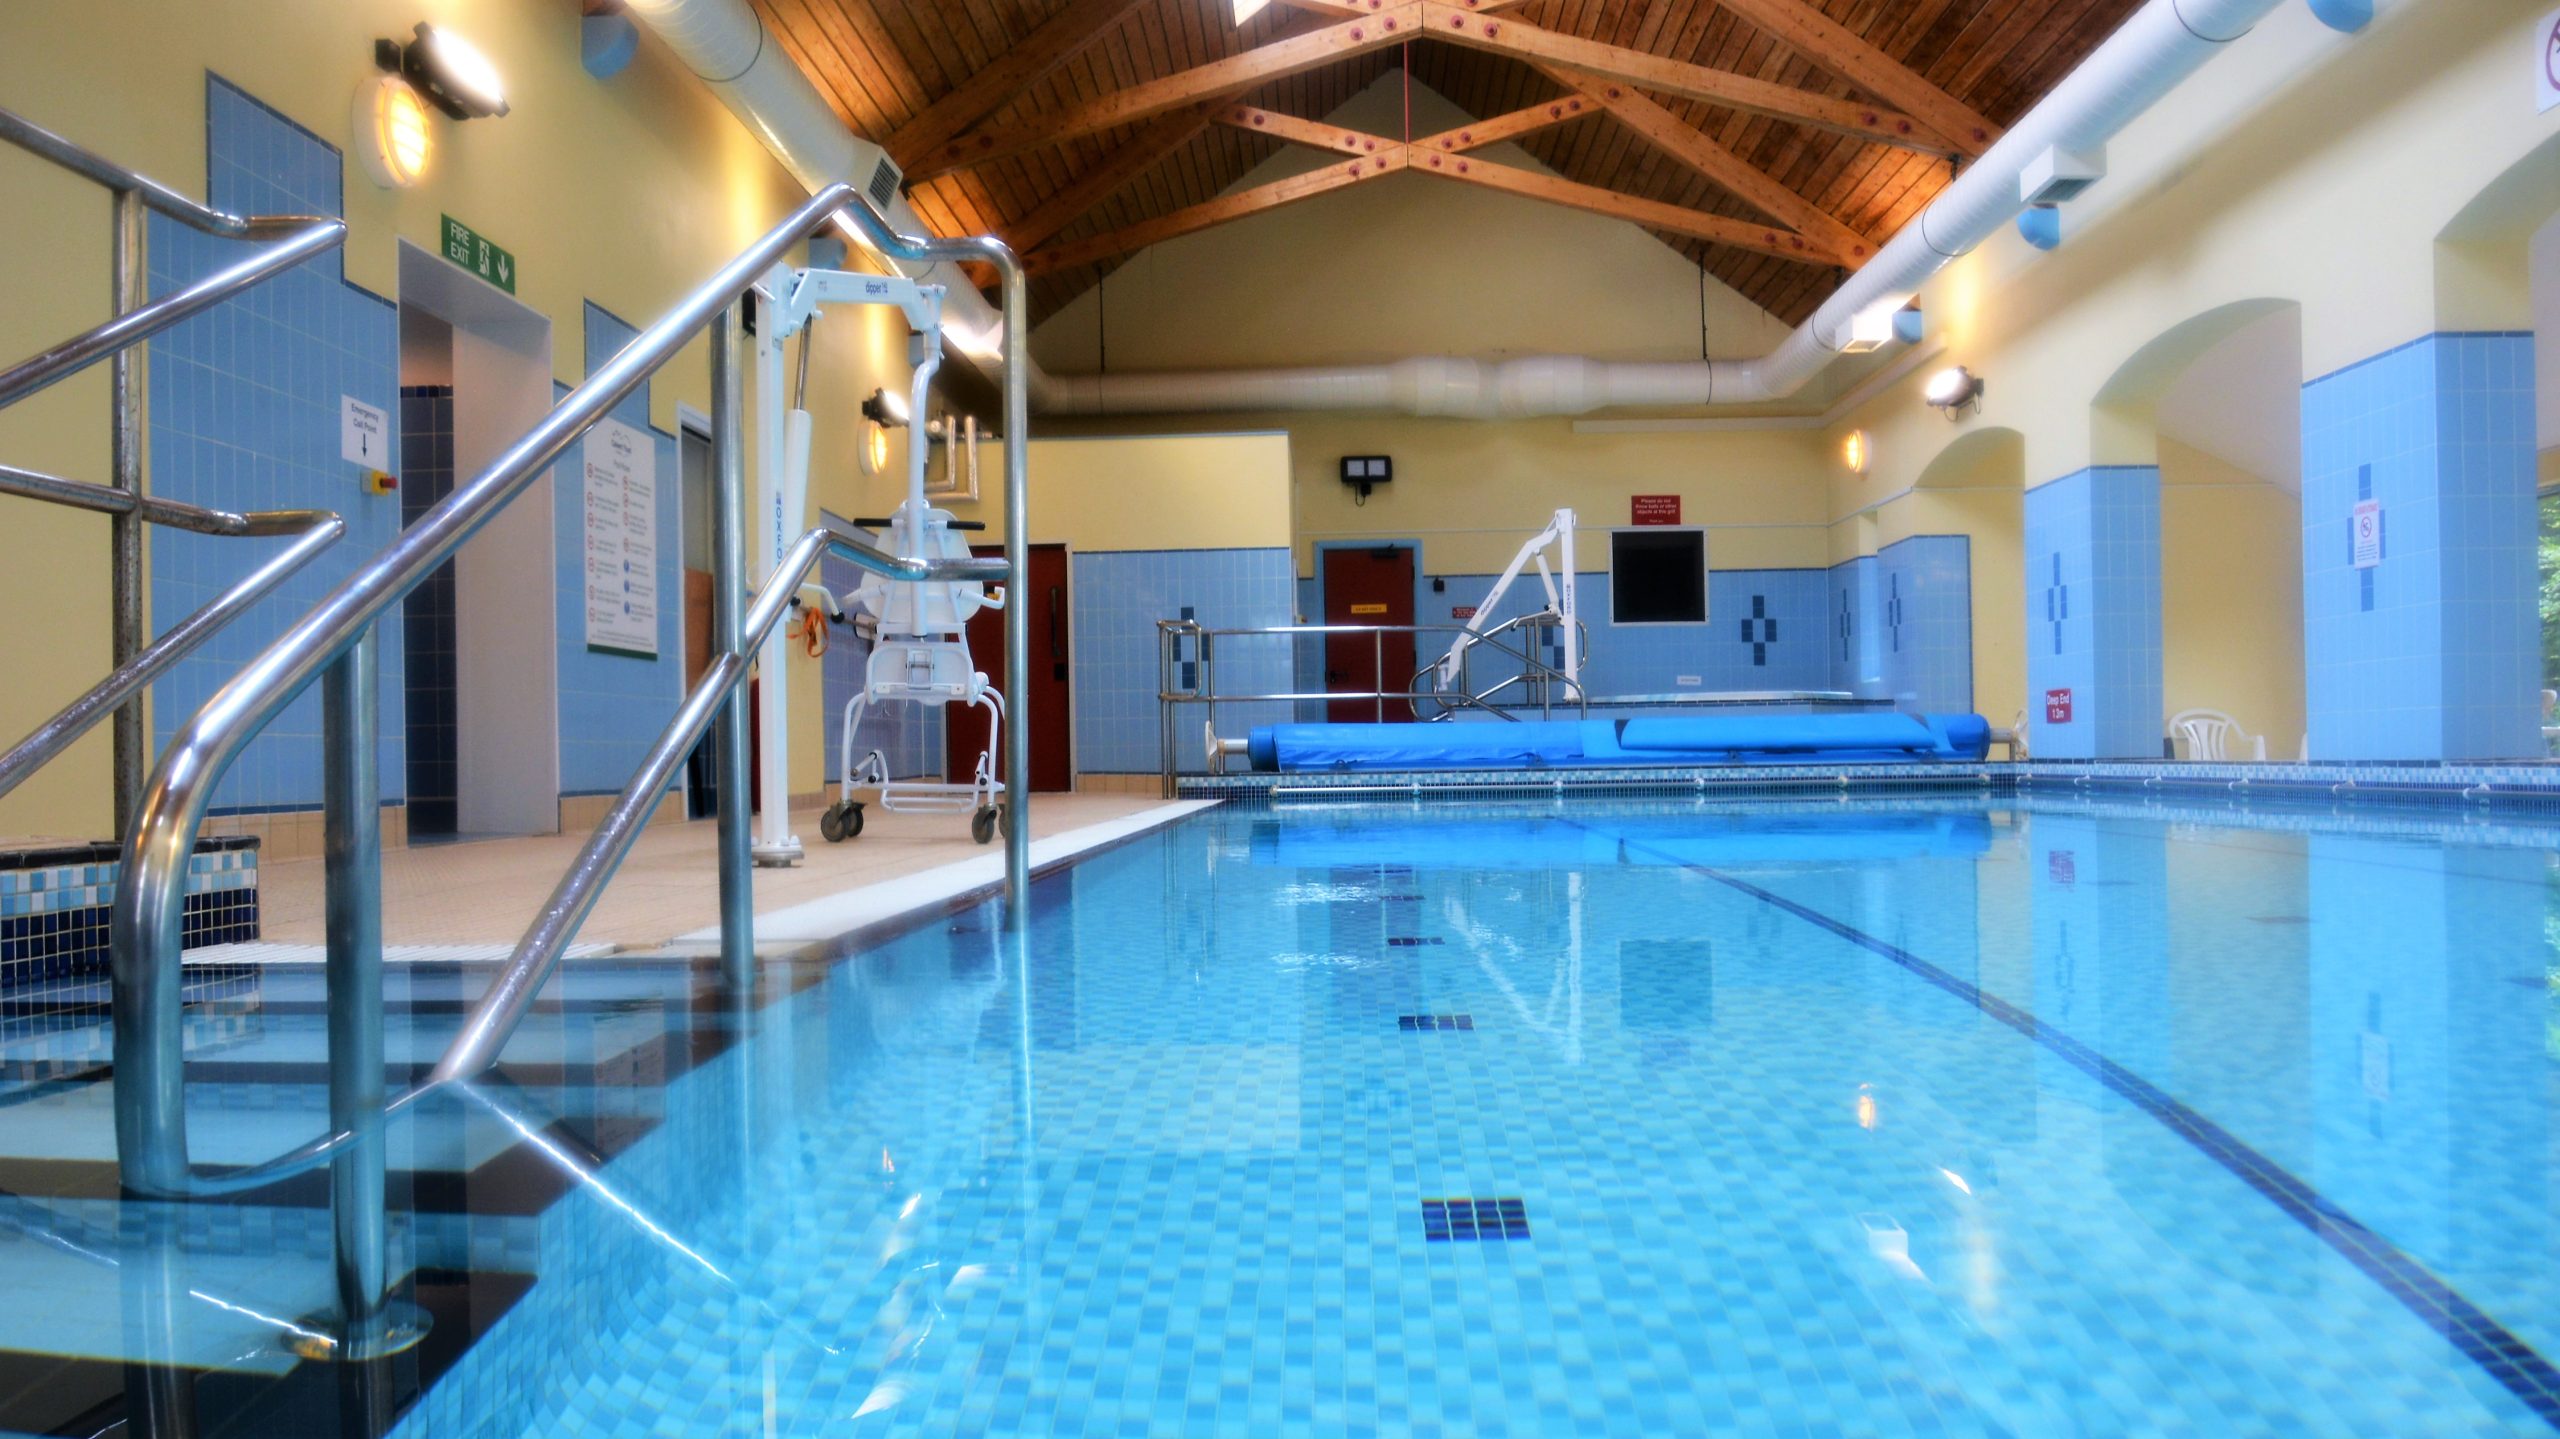 An empty bright blue clean swimming pool indoors with a hoist on the poolside to the left behind some steps leading into the pool.